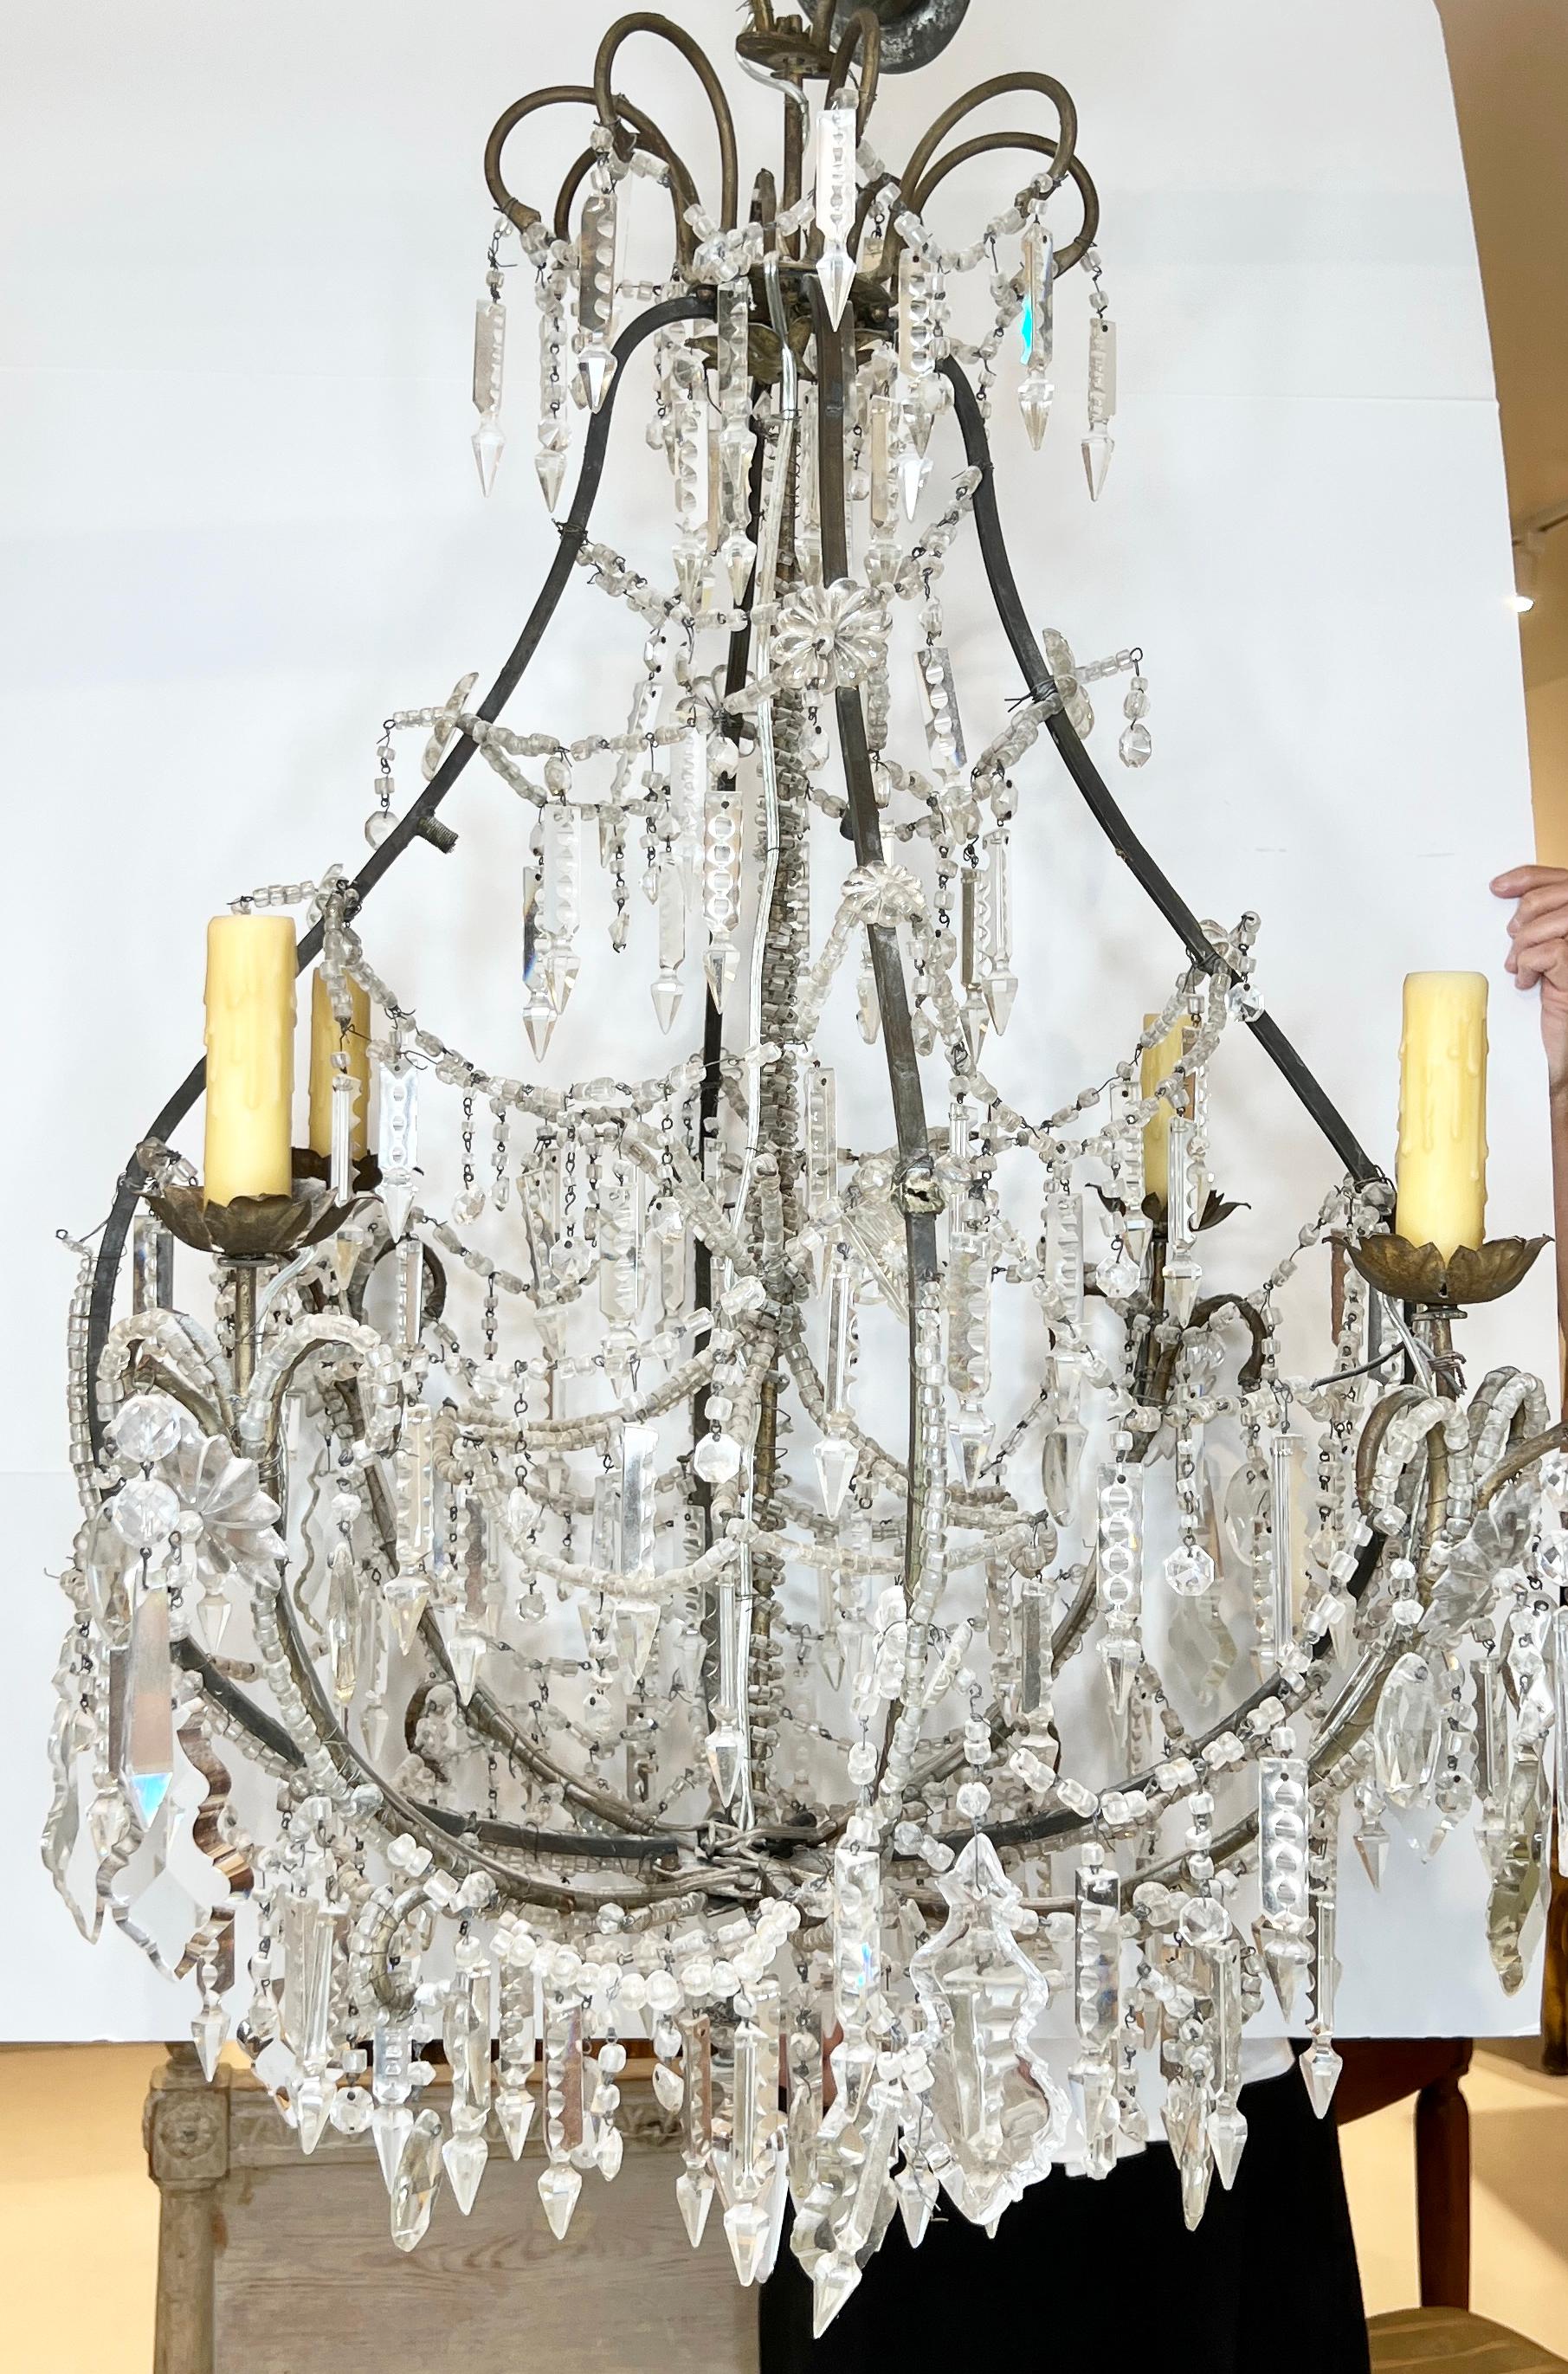 19th century Venetian chandelier graces any space with its classic crystals draped around the iron frame and lower portion. Crystal beads and drops adorn this unique iron contour to glamorize any space.  Wired for US, but not UL approved.